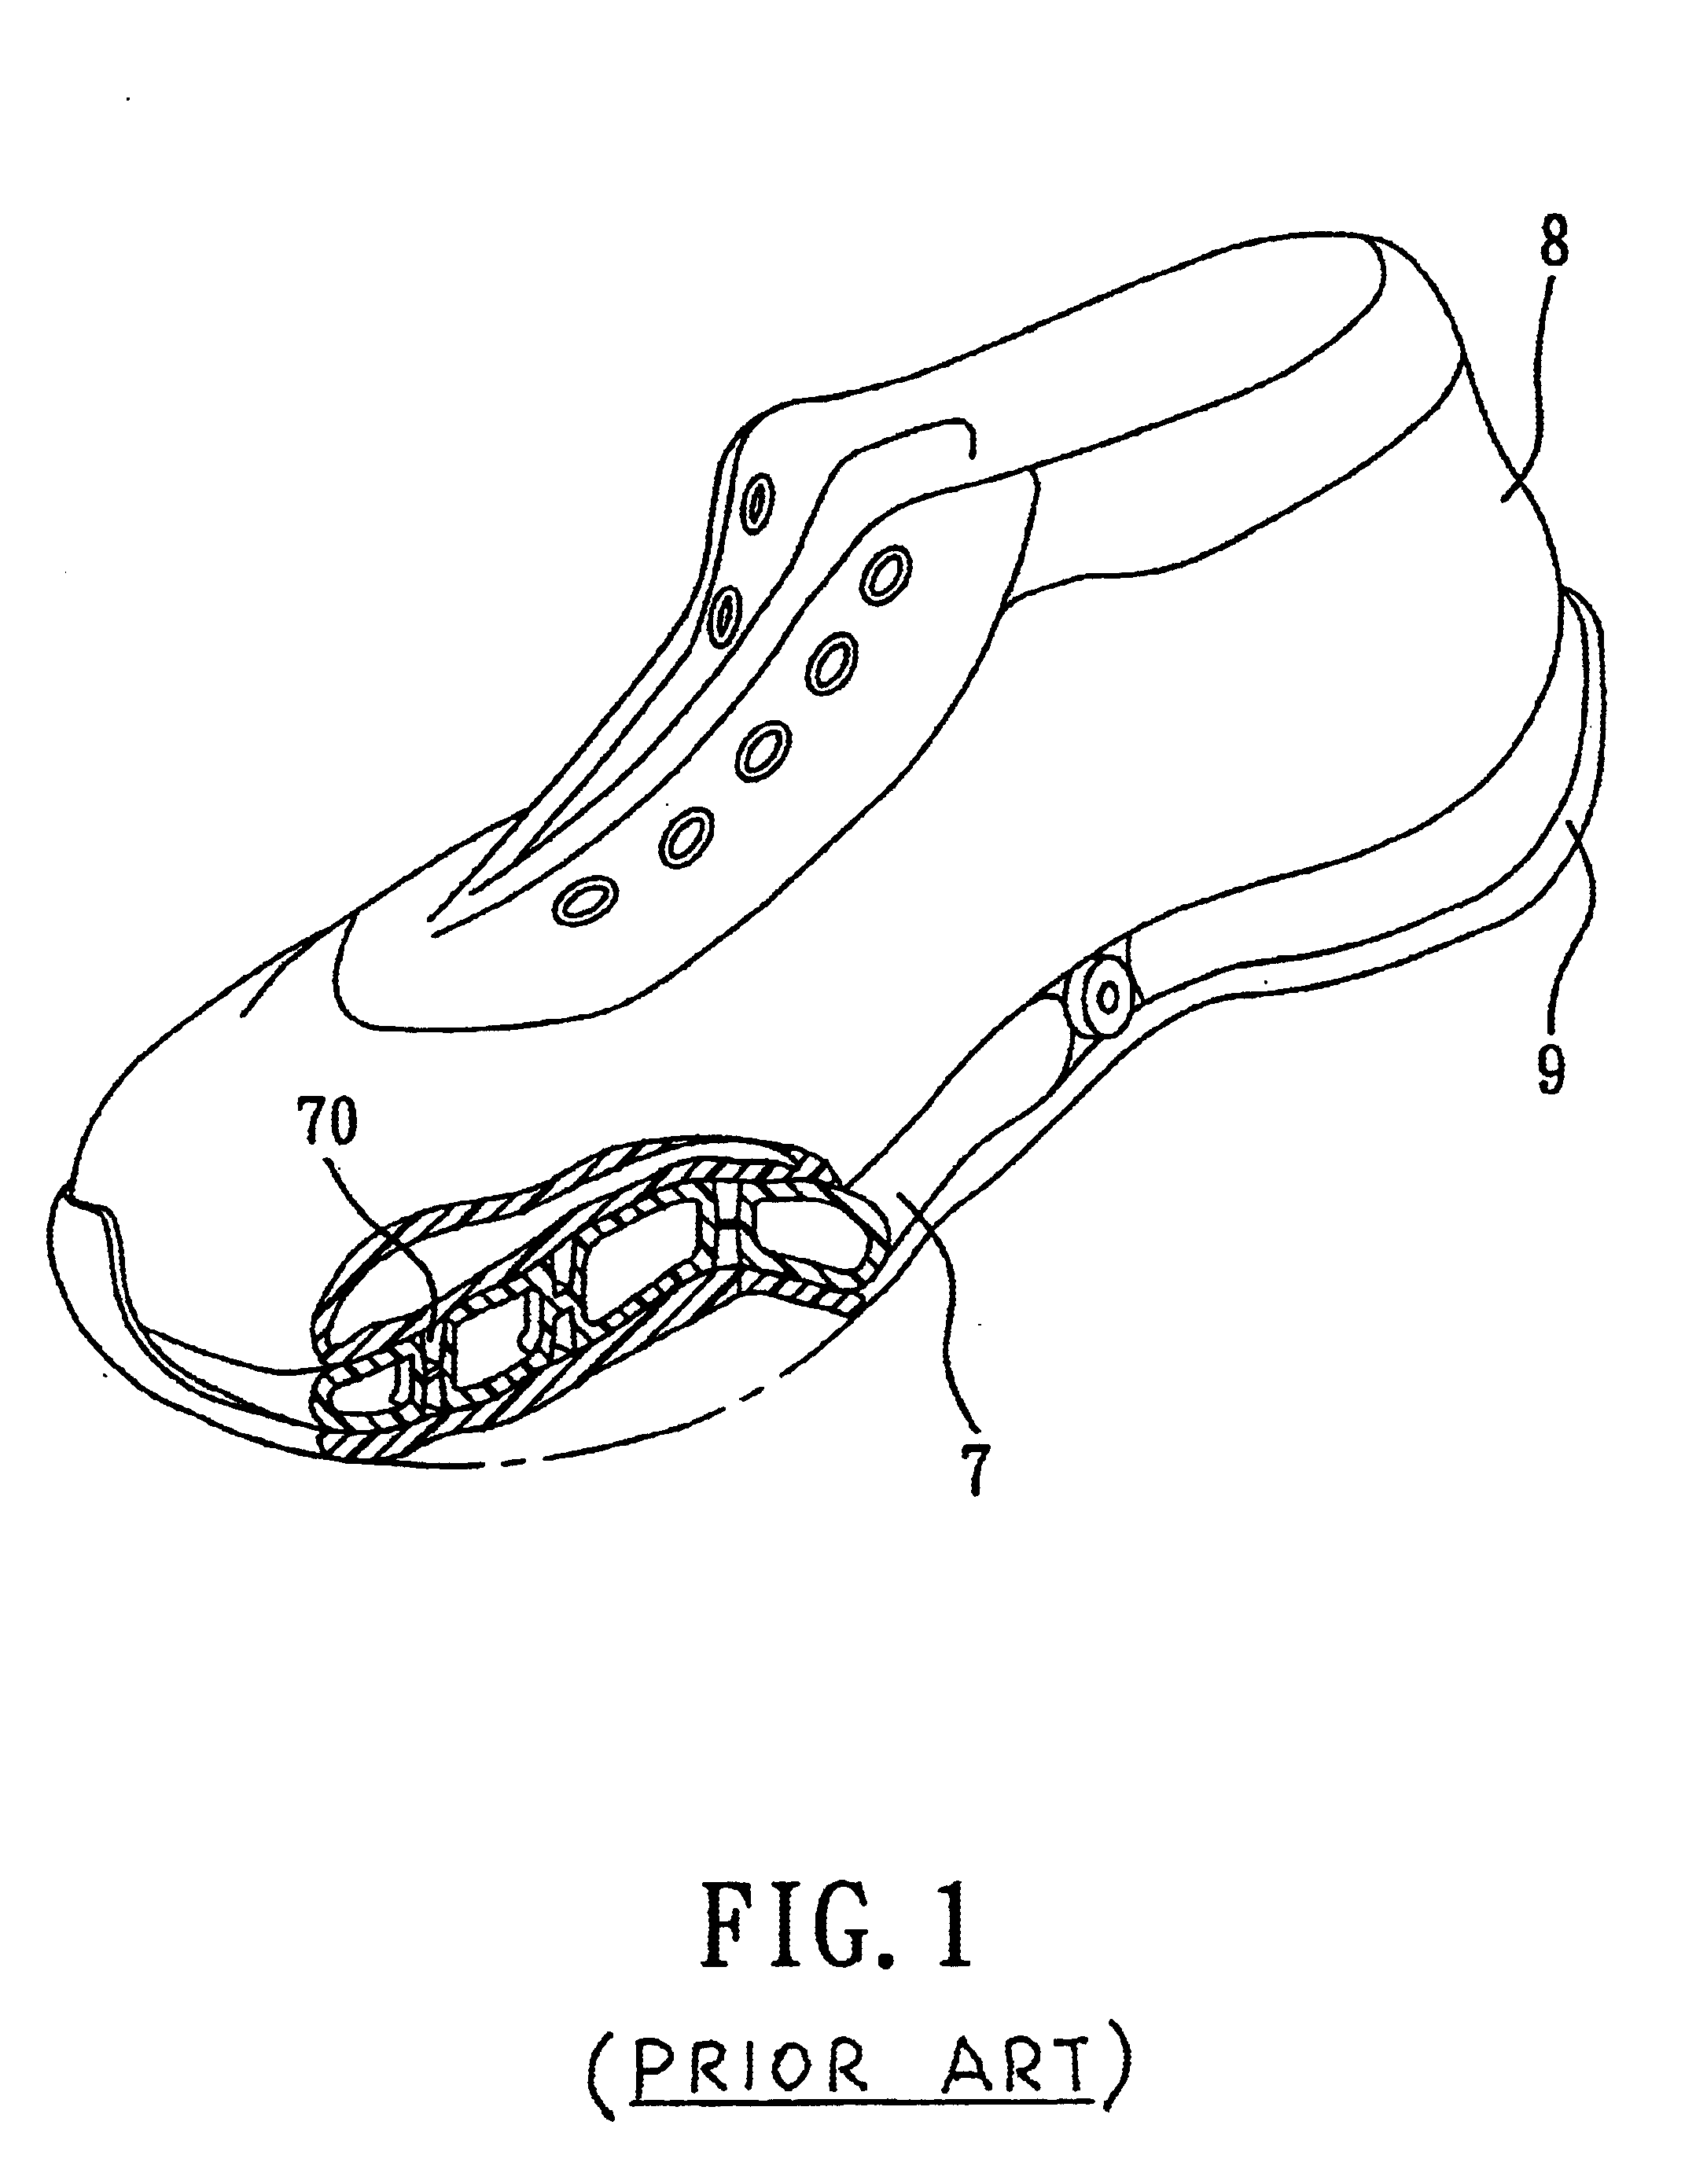 Footwear with an air cushion and a method for making the same